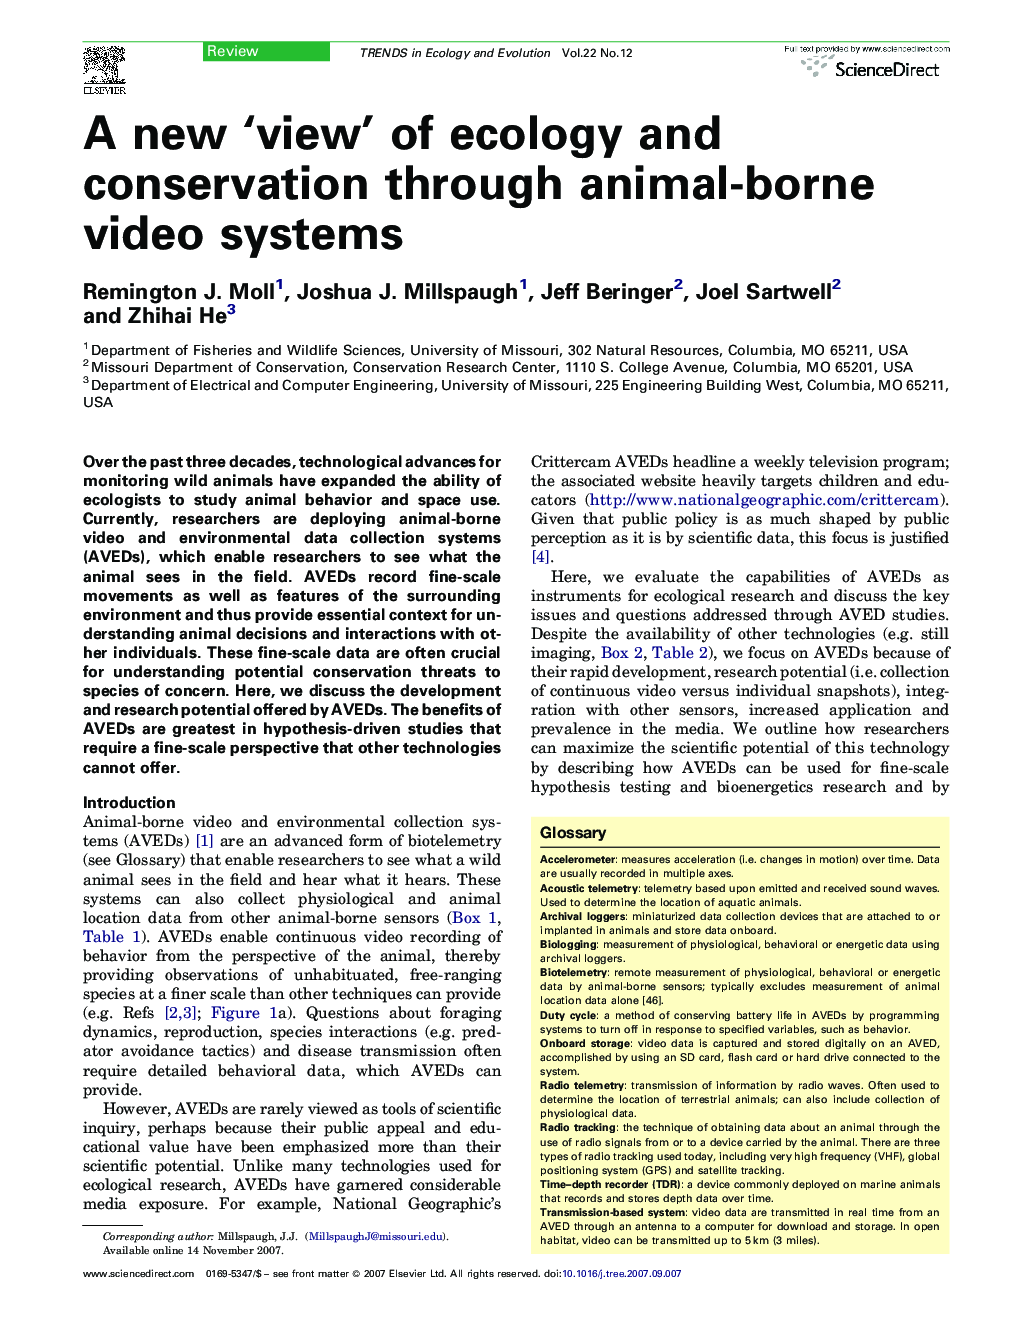 A new ‘view’ of ecology and conservation through animal-borne video systems